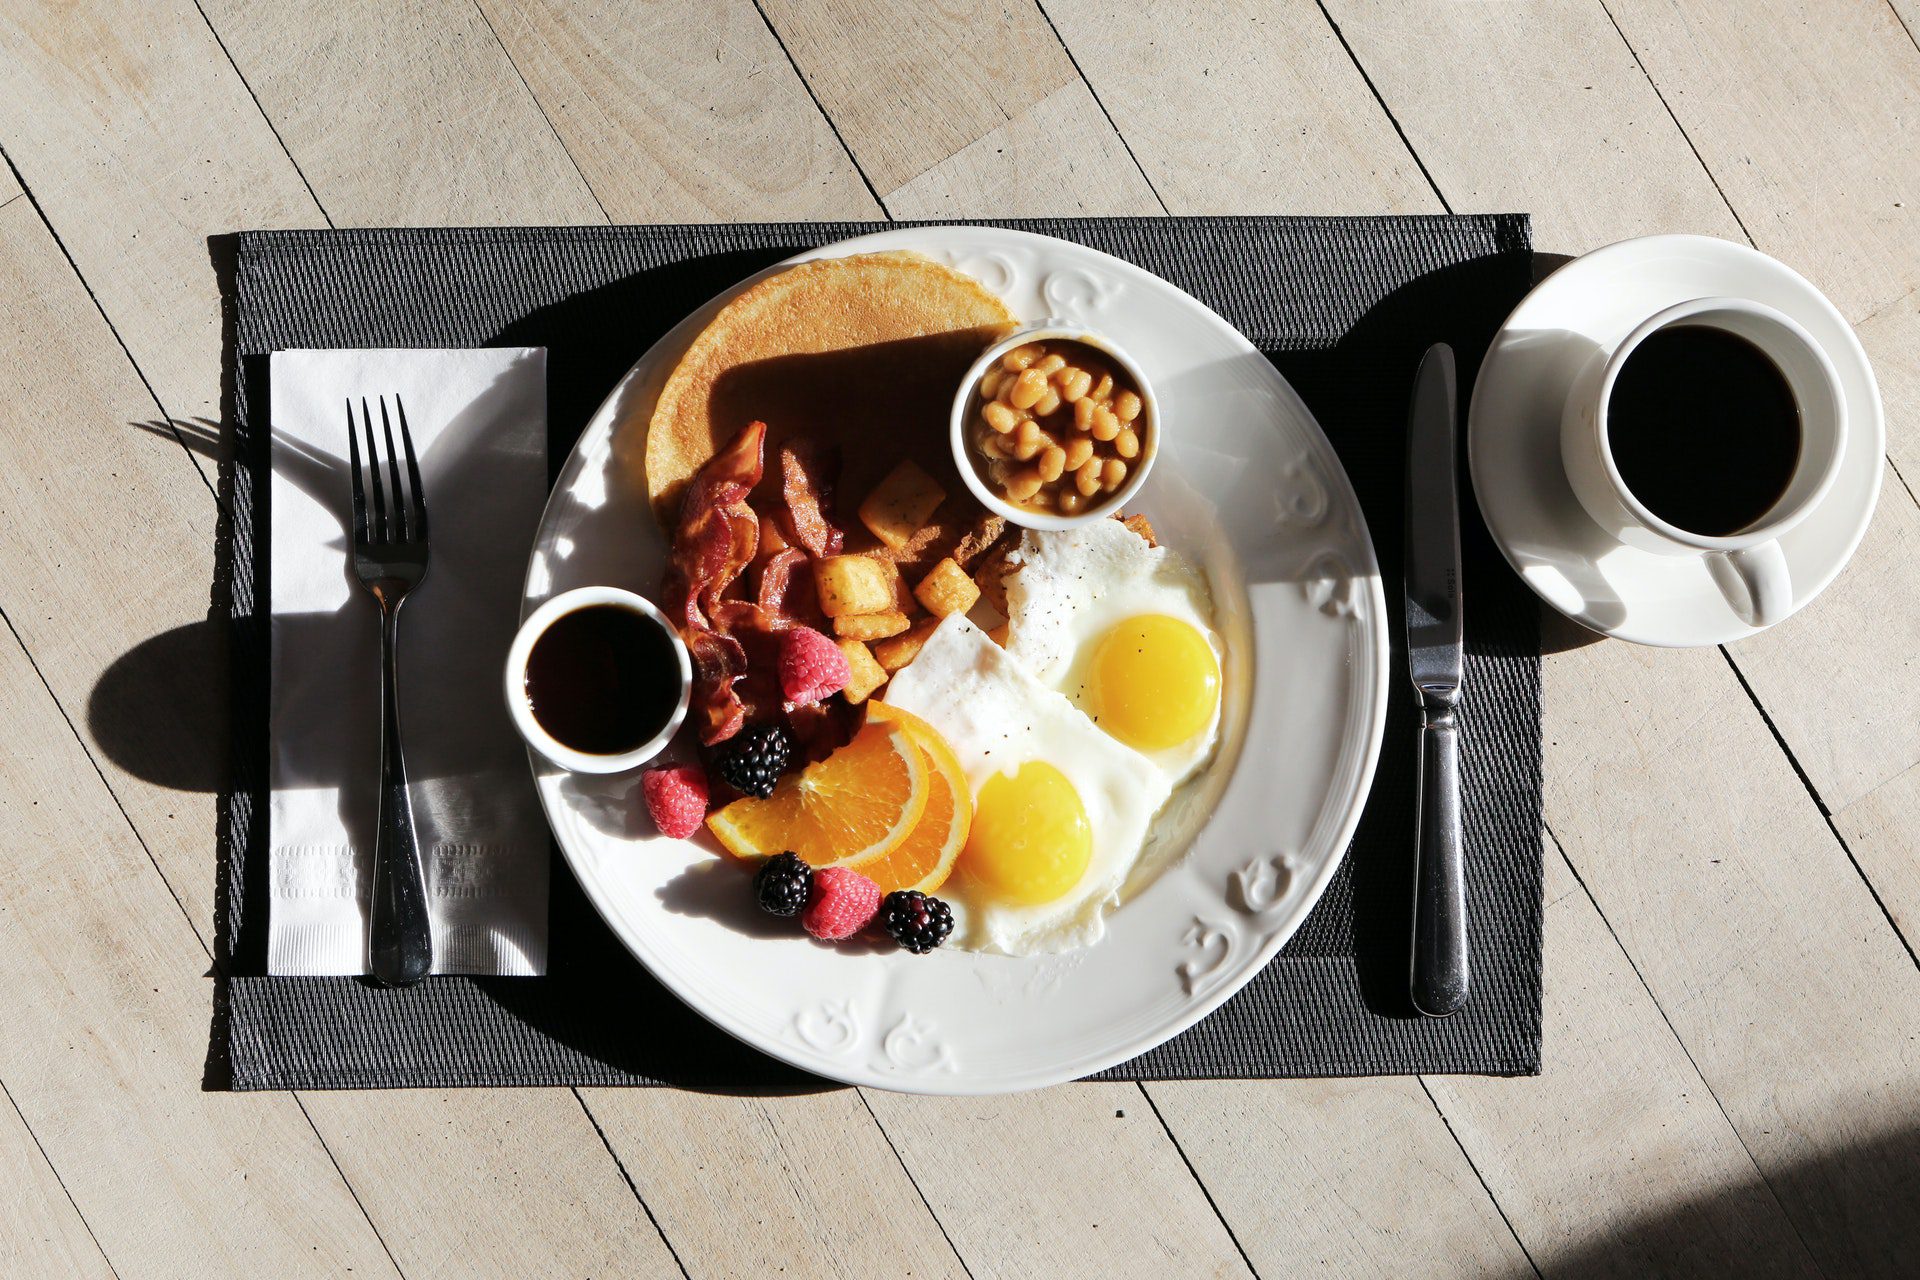 a breakfast setting on a wooden table with a plate of eggs, pancakes, bacon and fruits